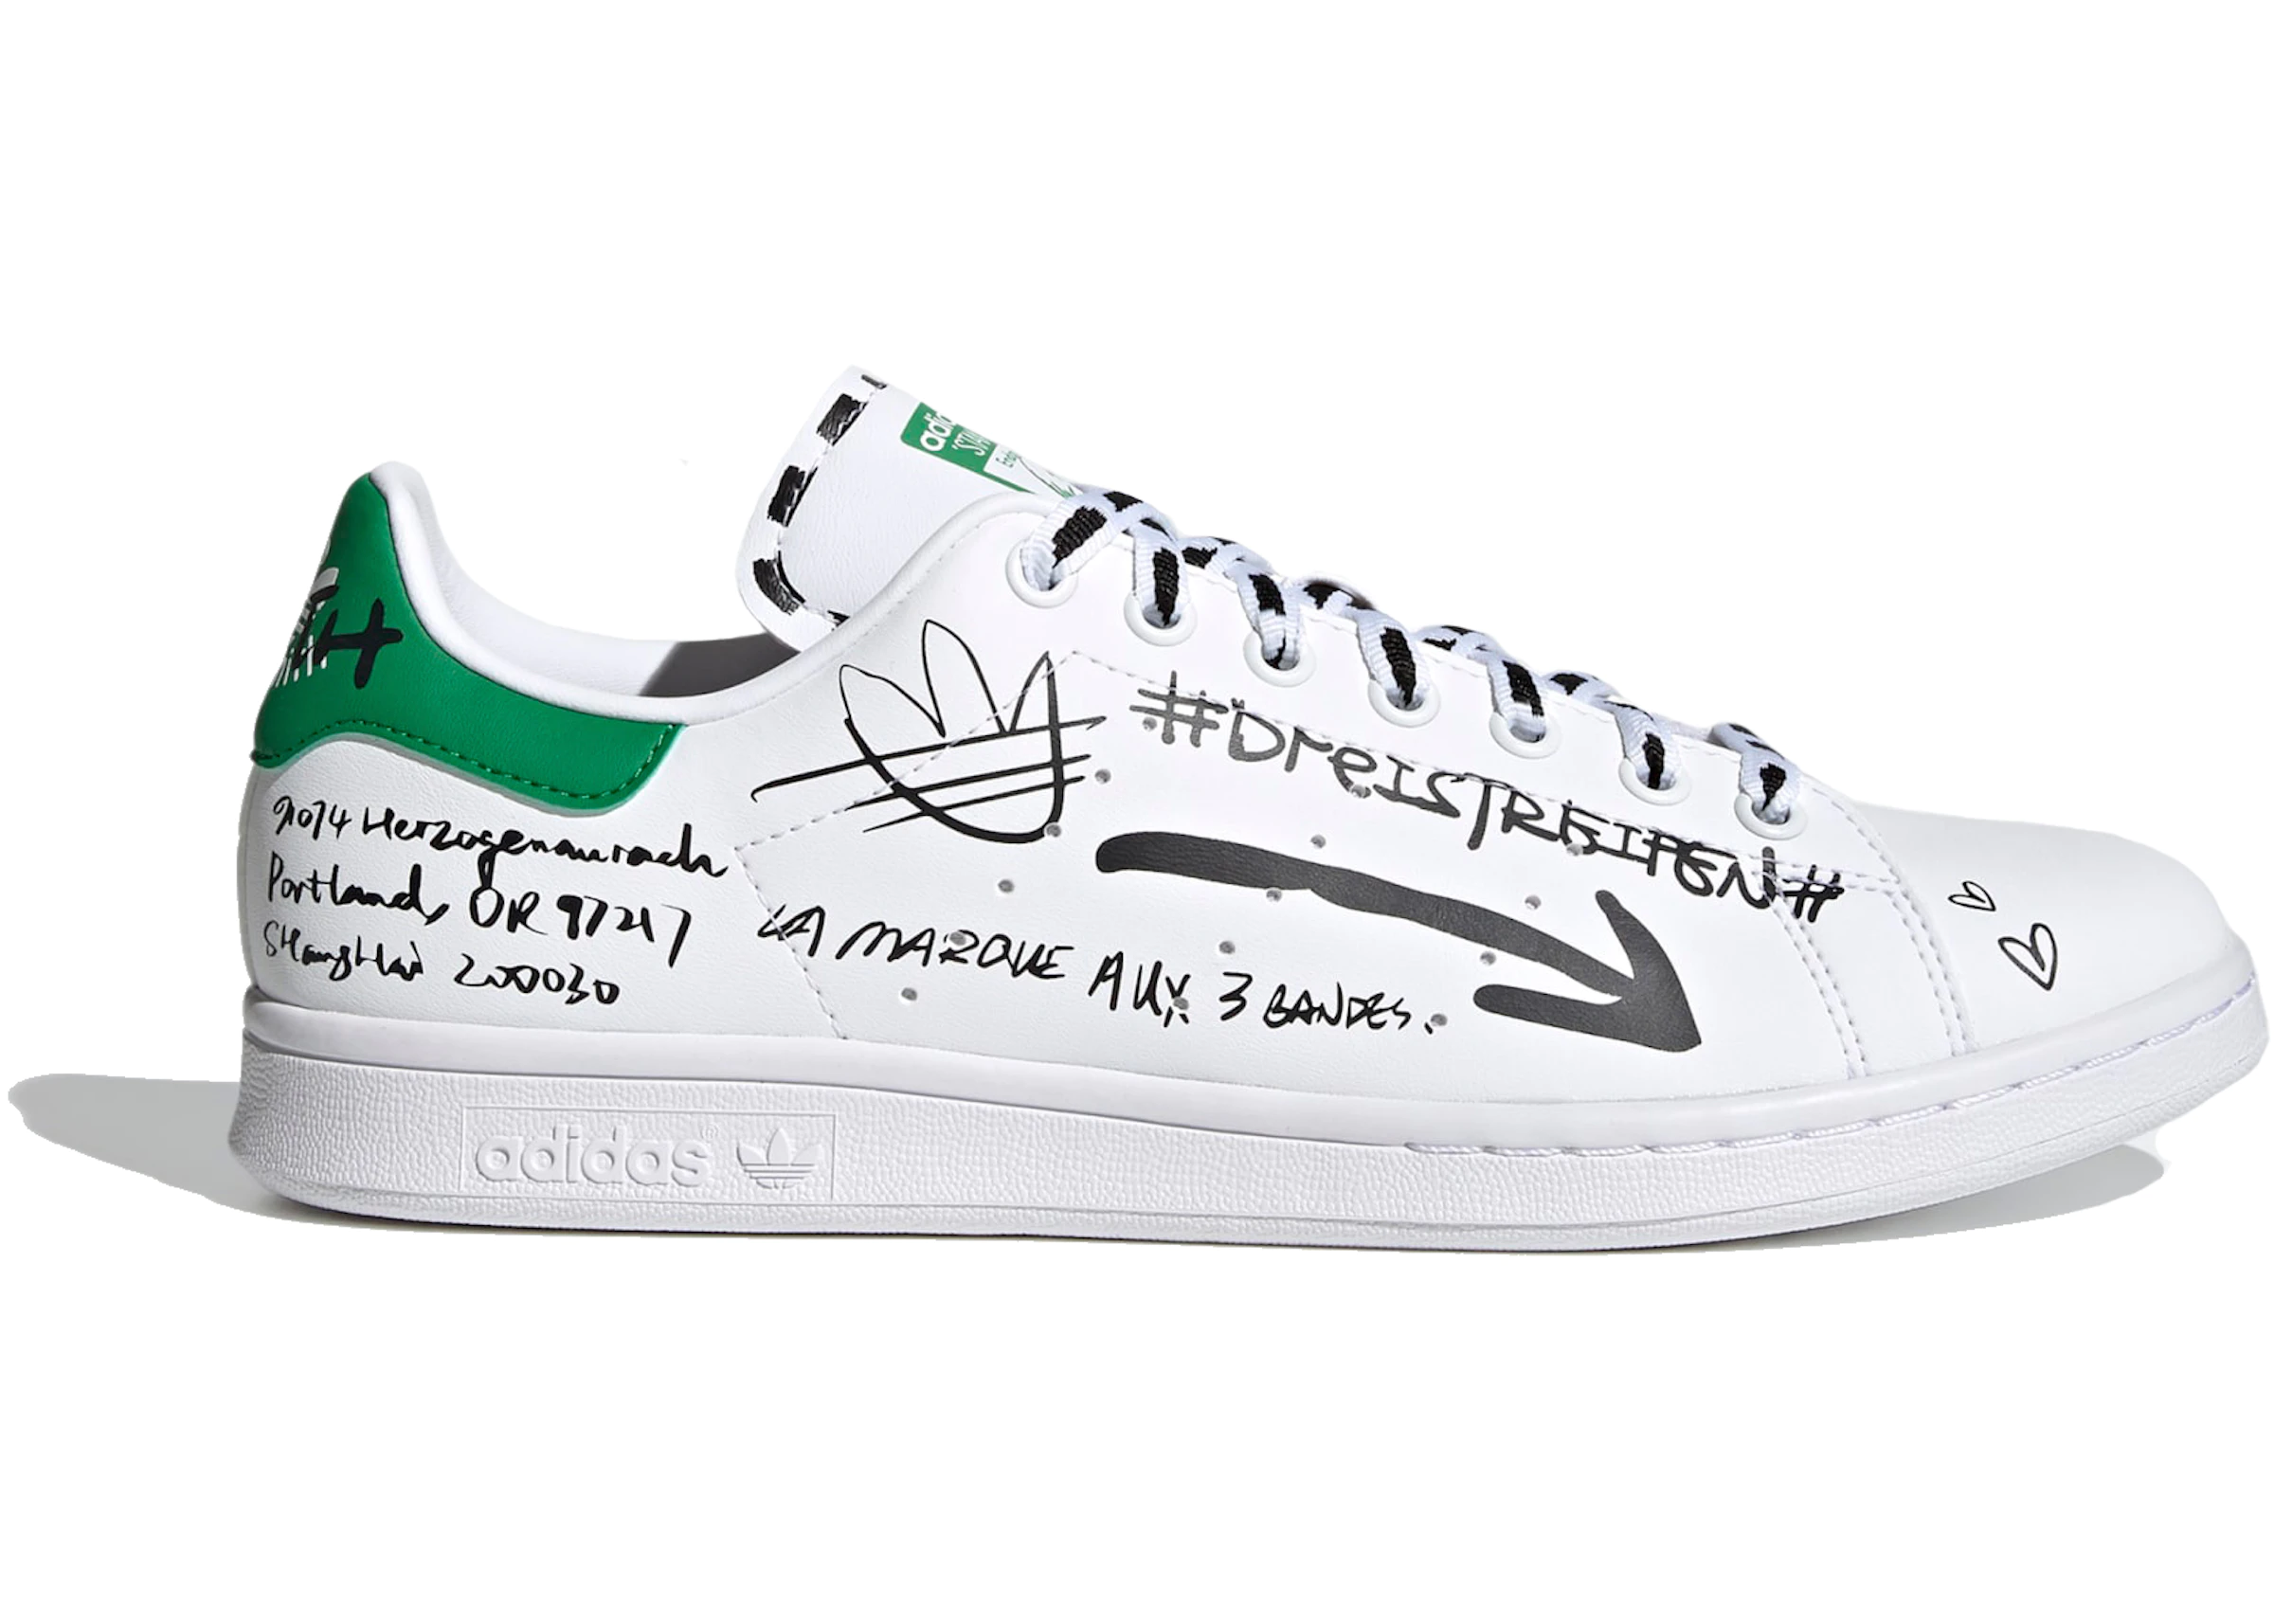 The appliance so much Perpetrator adidas Stan Smith Sharpie Pack Graffiti White - GV9800 - US